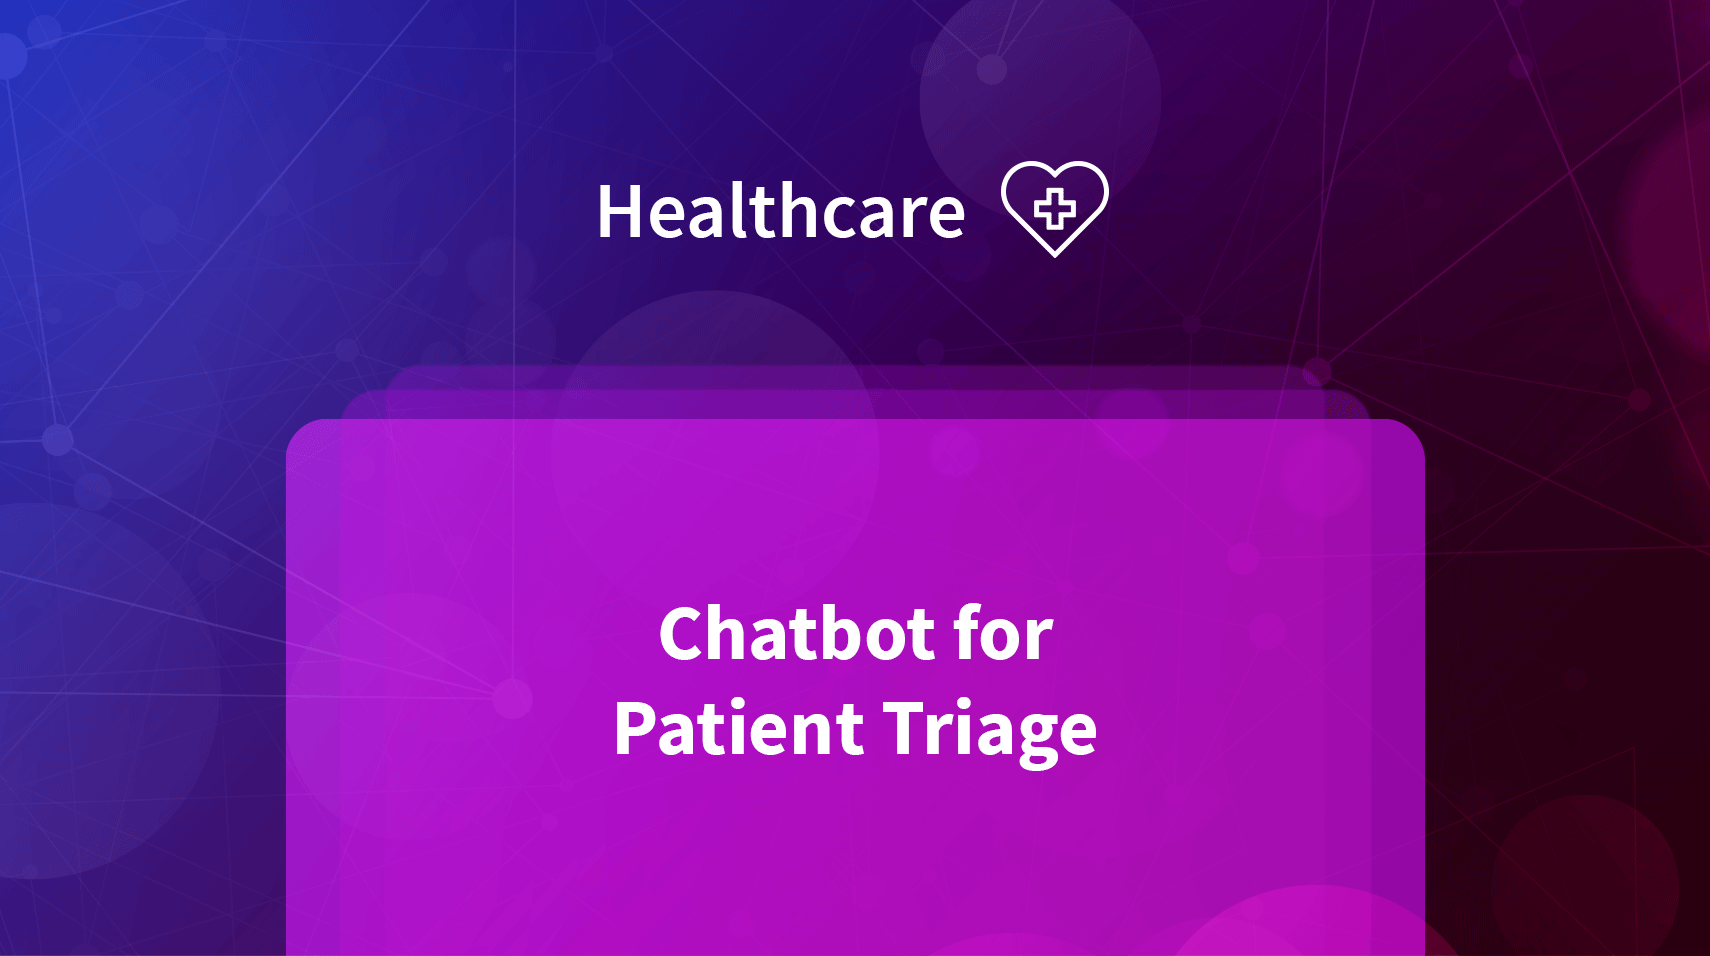 Chatbot for Patient Triage